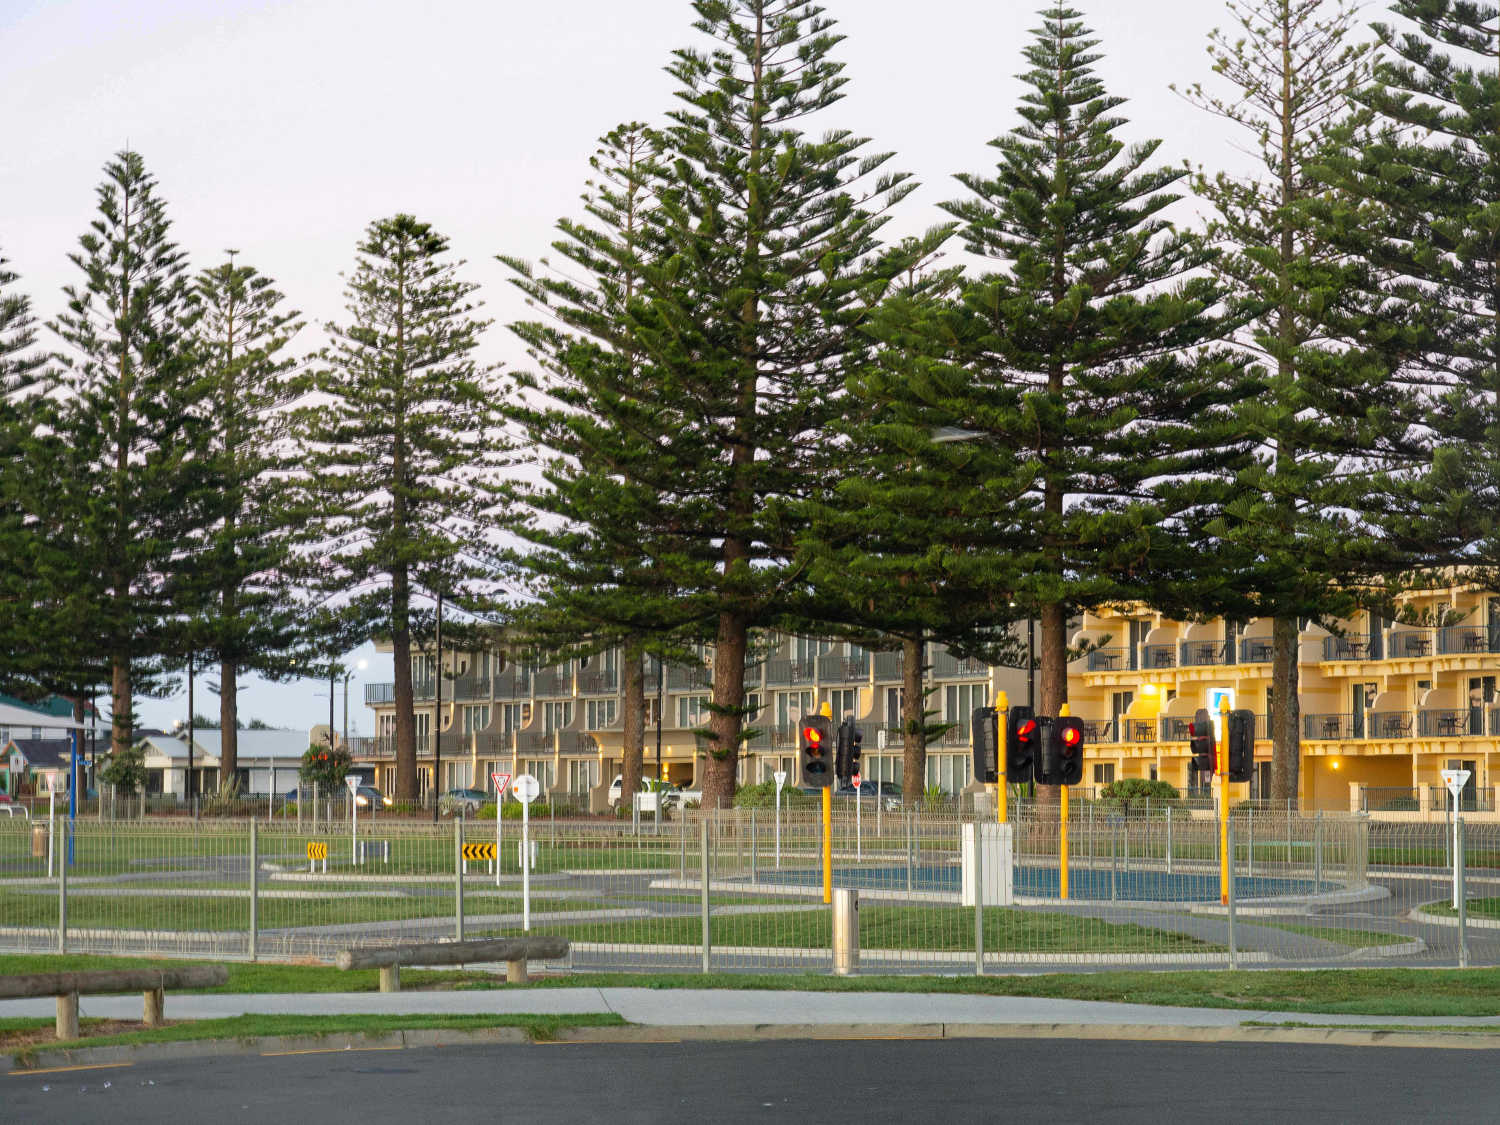 Kids Cycle Track With Traffic Lights, Napier Marine Parade, New Zealand